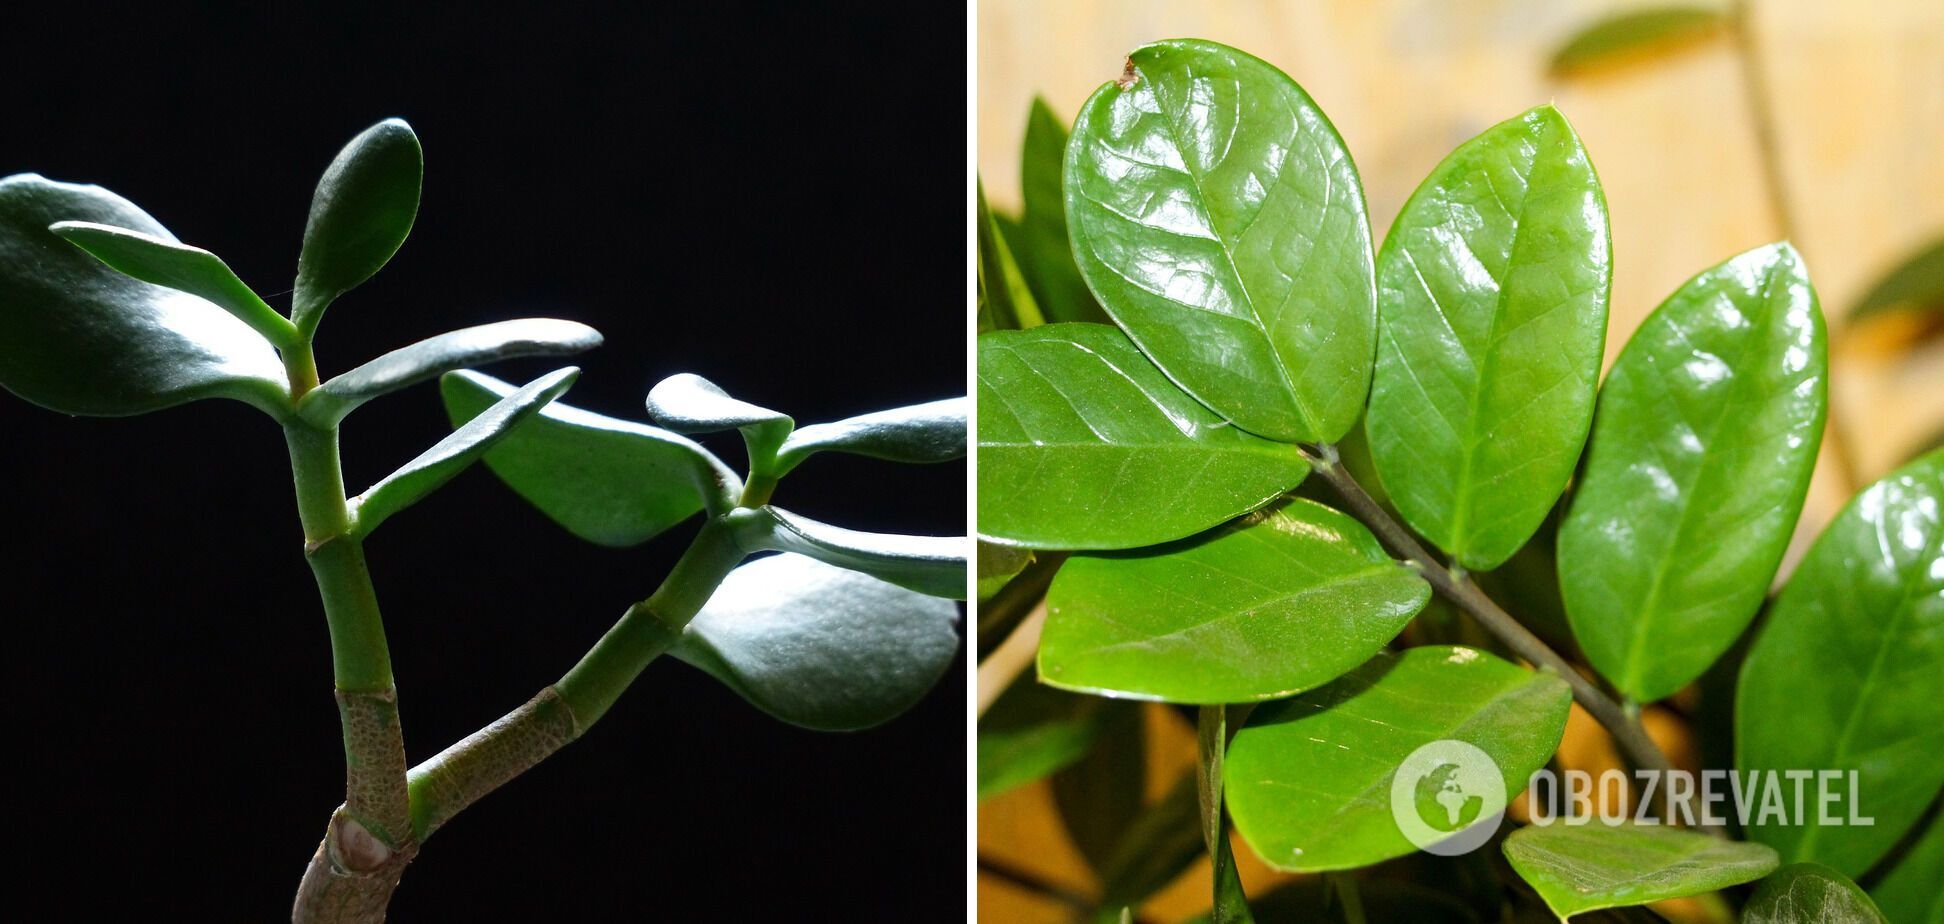 Jade plants can cause abdominal pain and vomiting